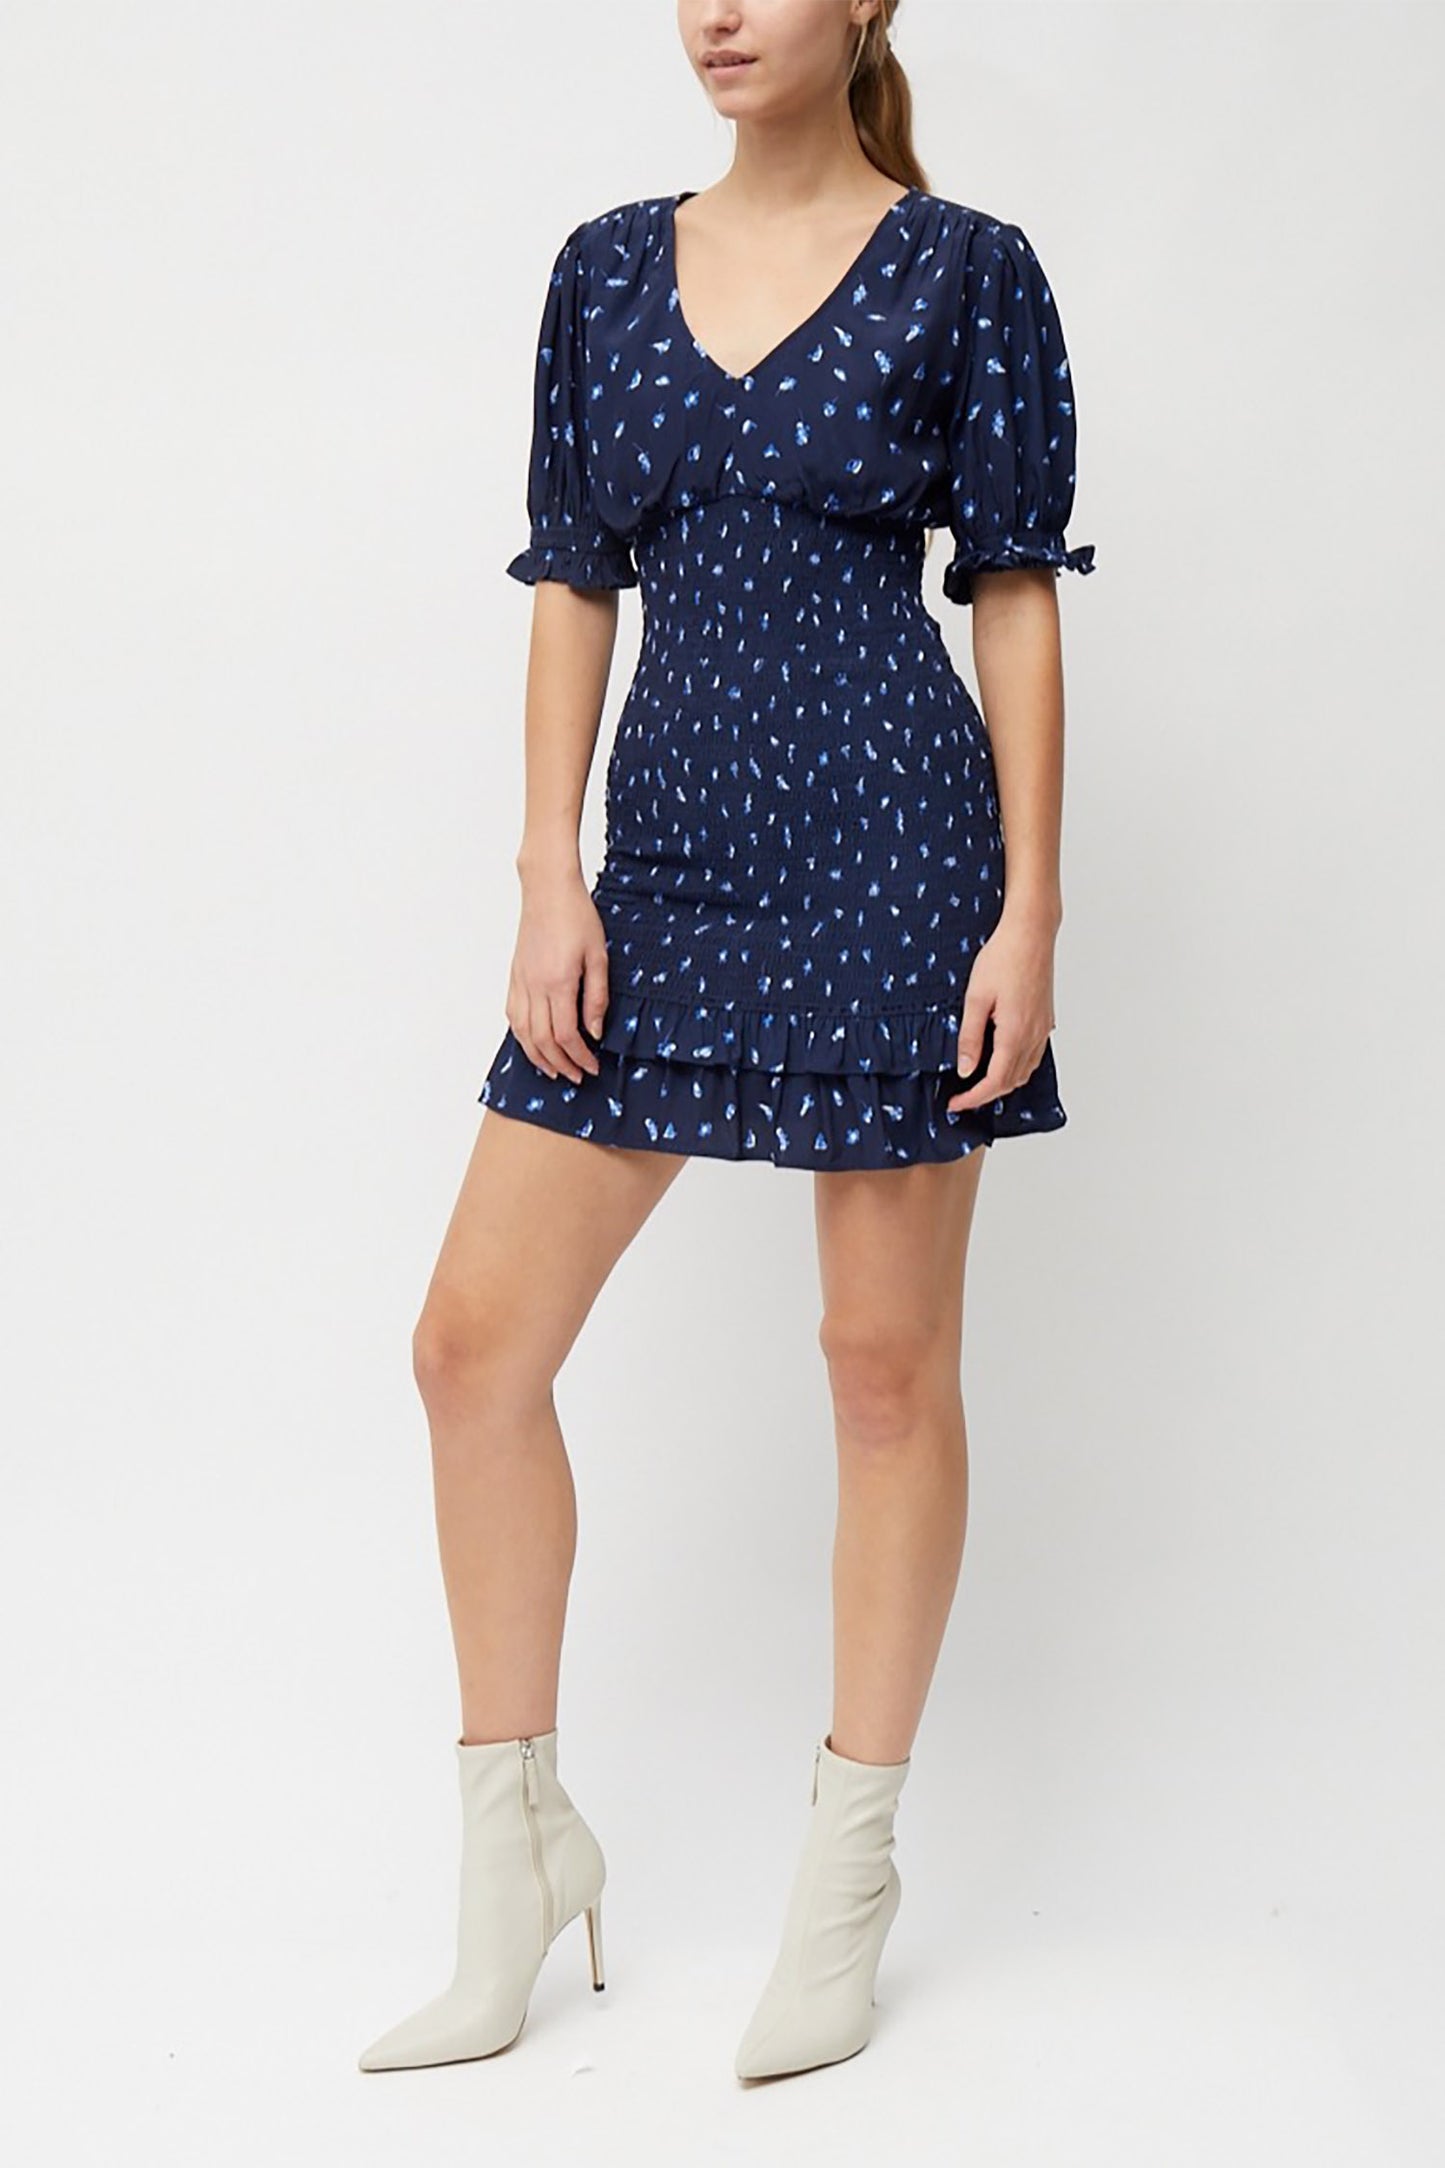 Bhelle Collette Smock Dress - French Connection